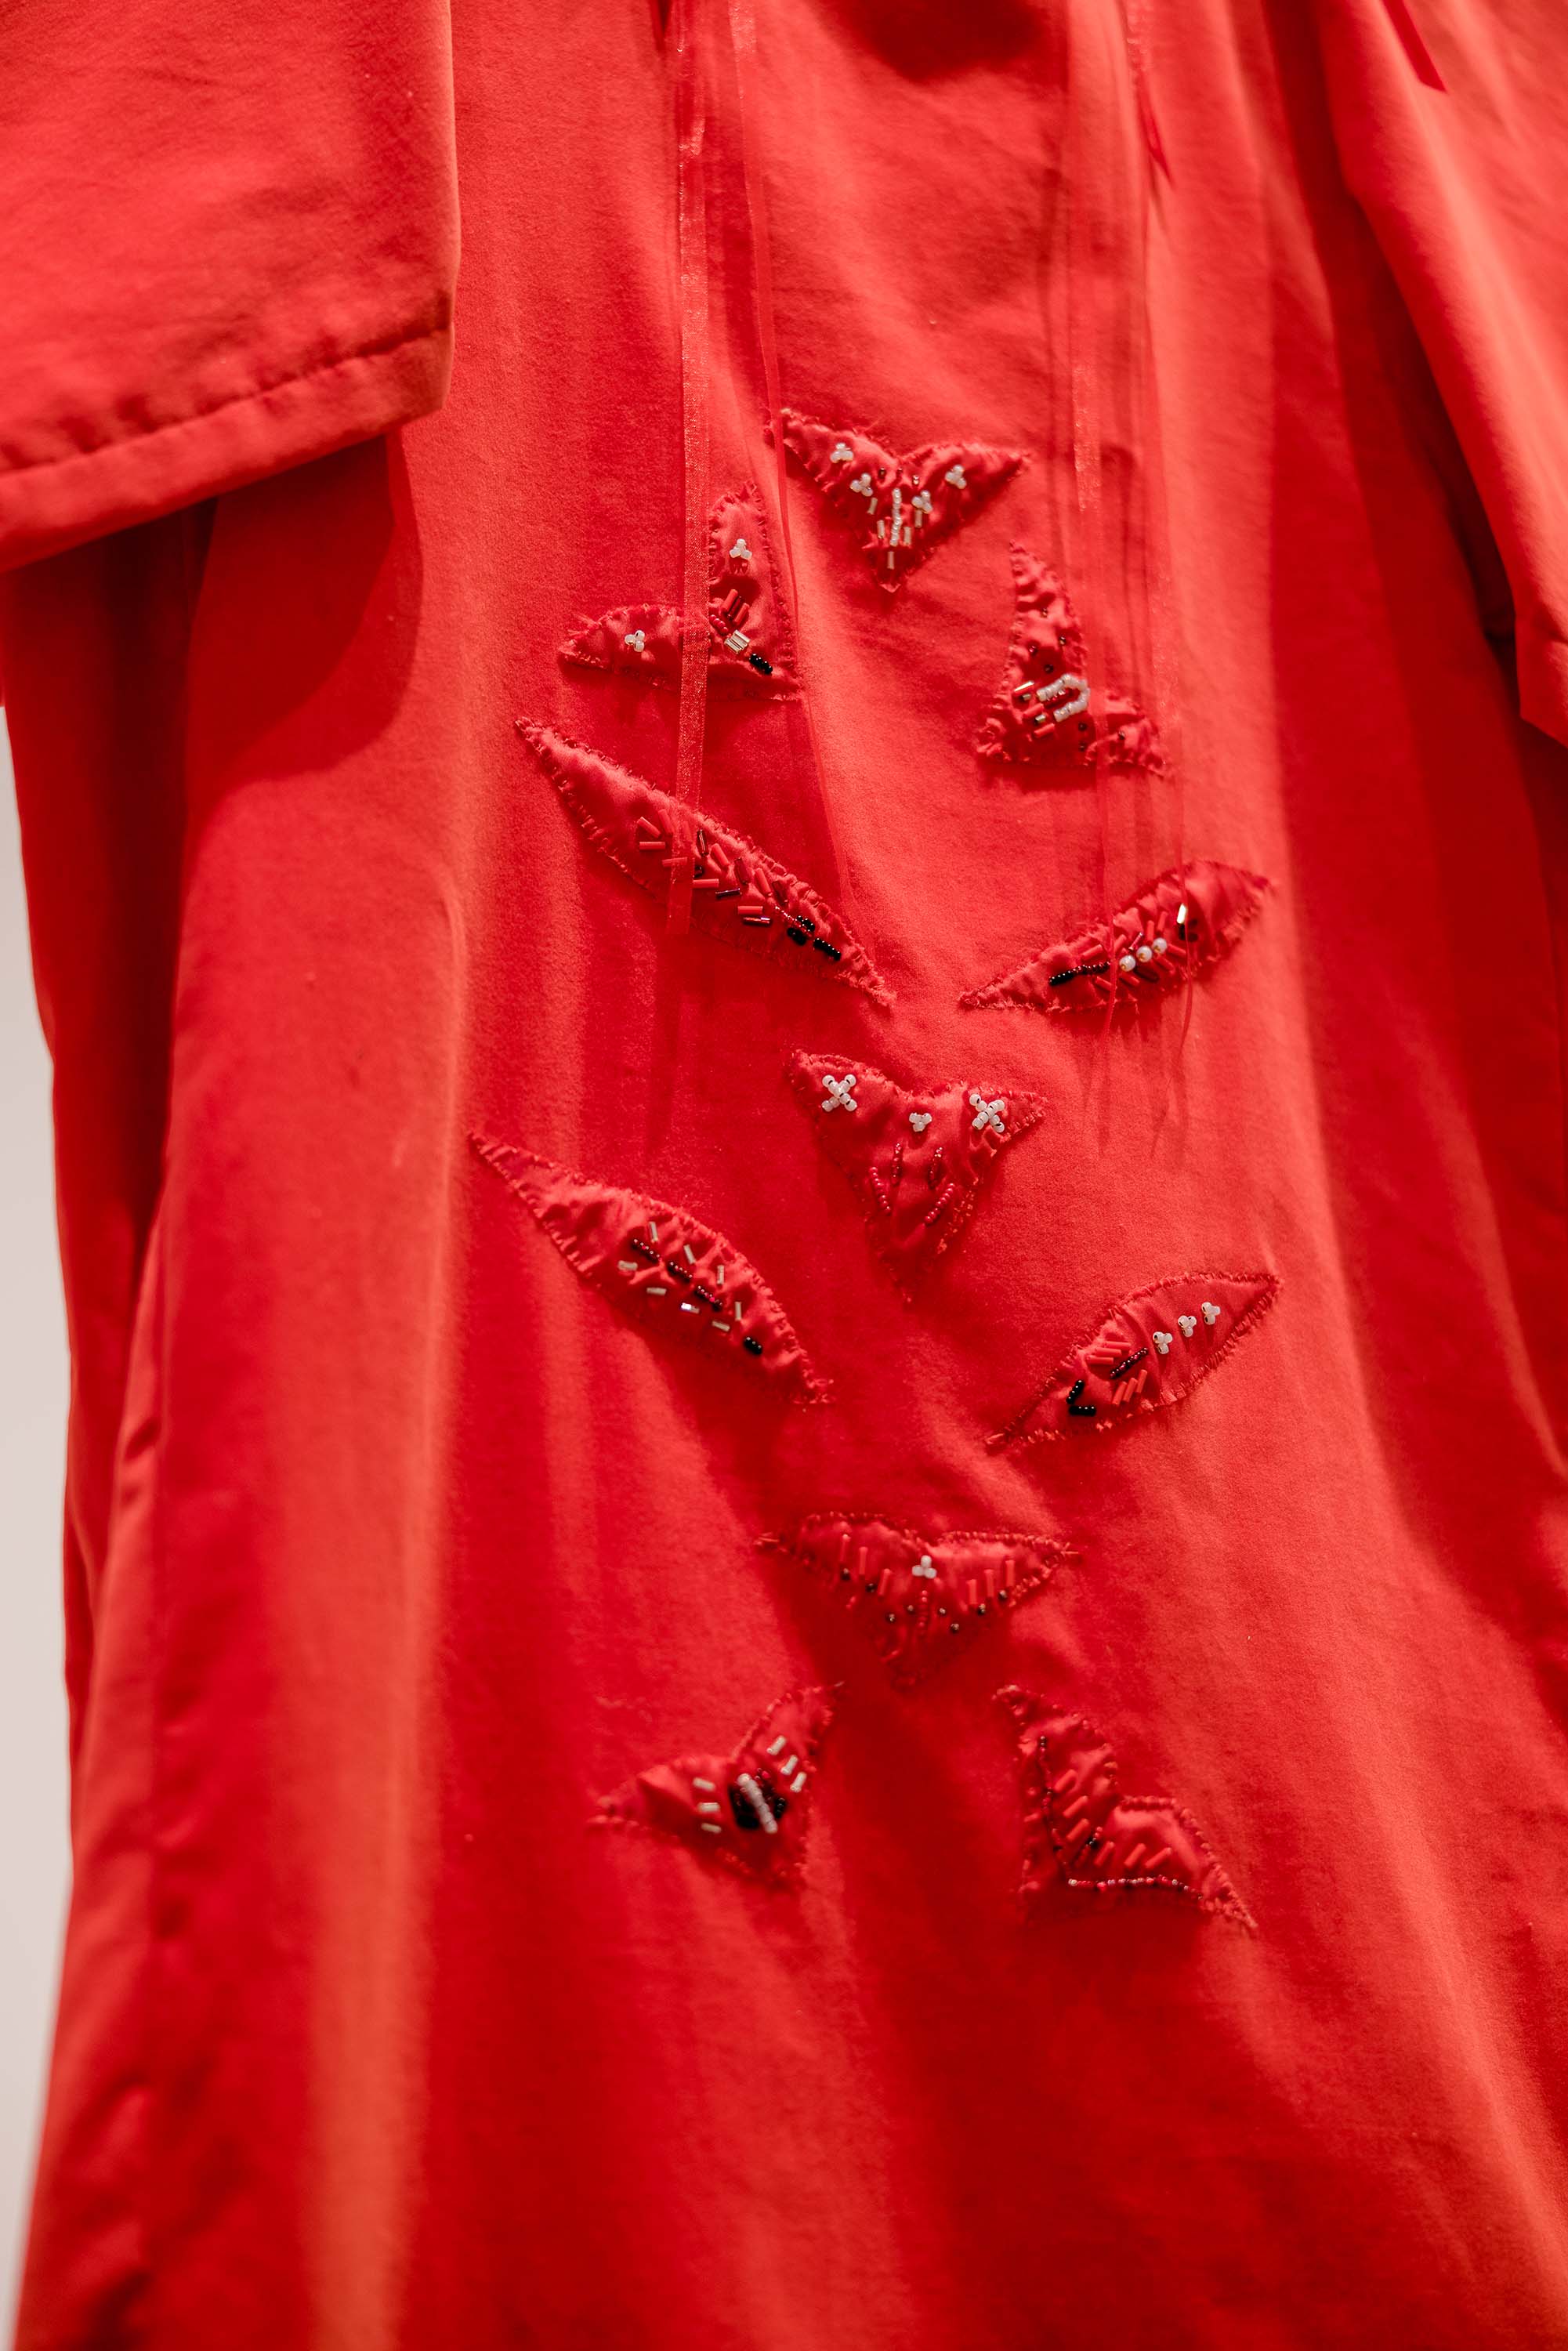 A close-up of a red dress with several beaded red appliques.